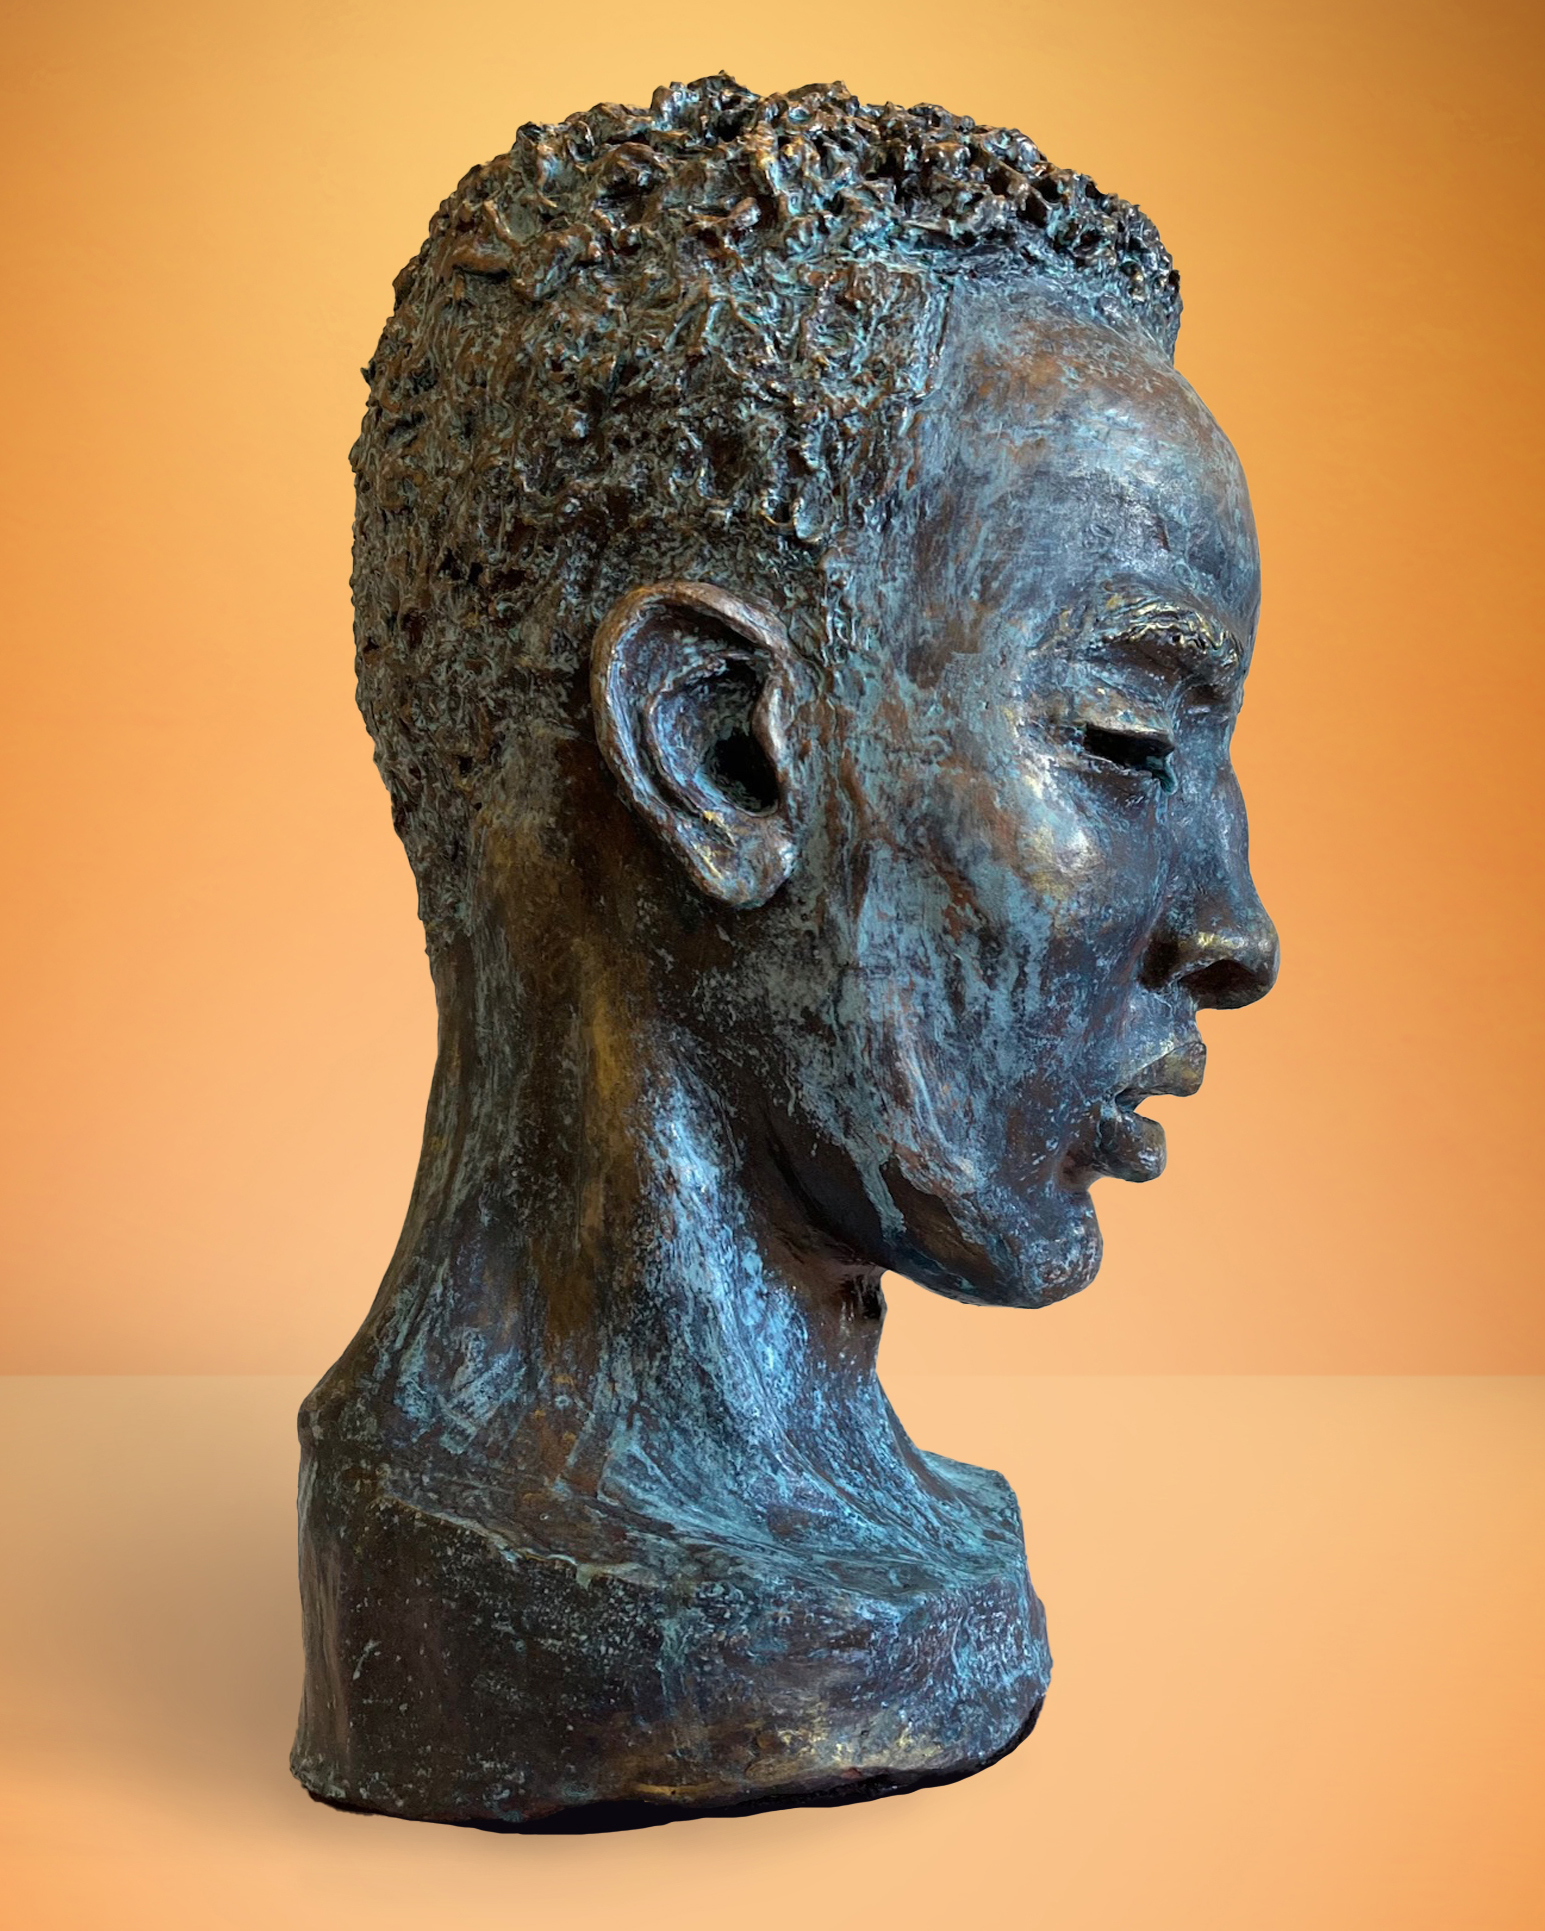 Clay Sculpture Sealed and Finished in Aged Bronze Patina $2300